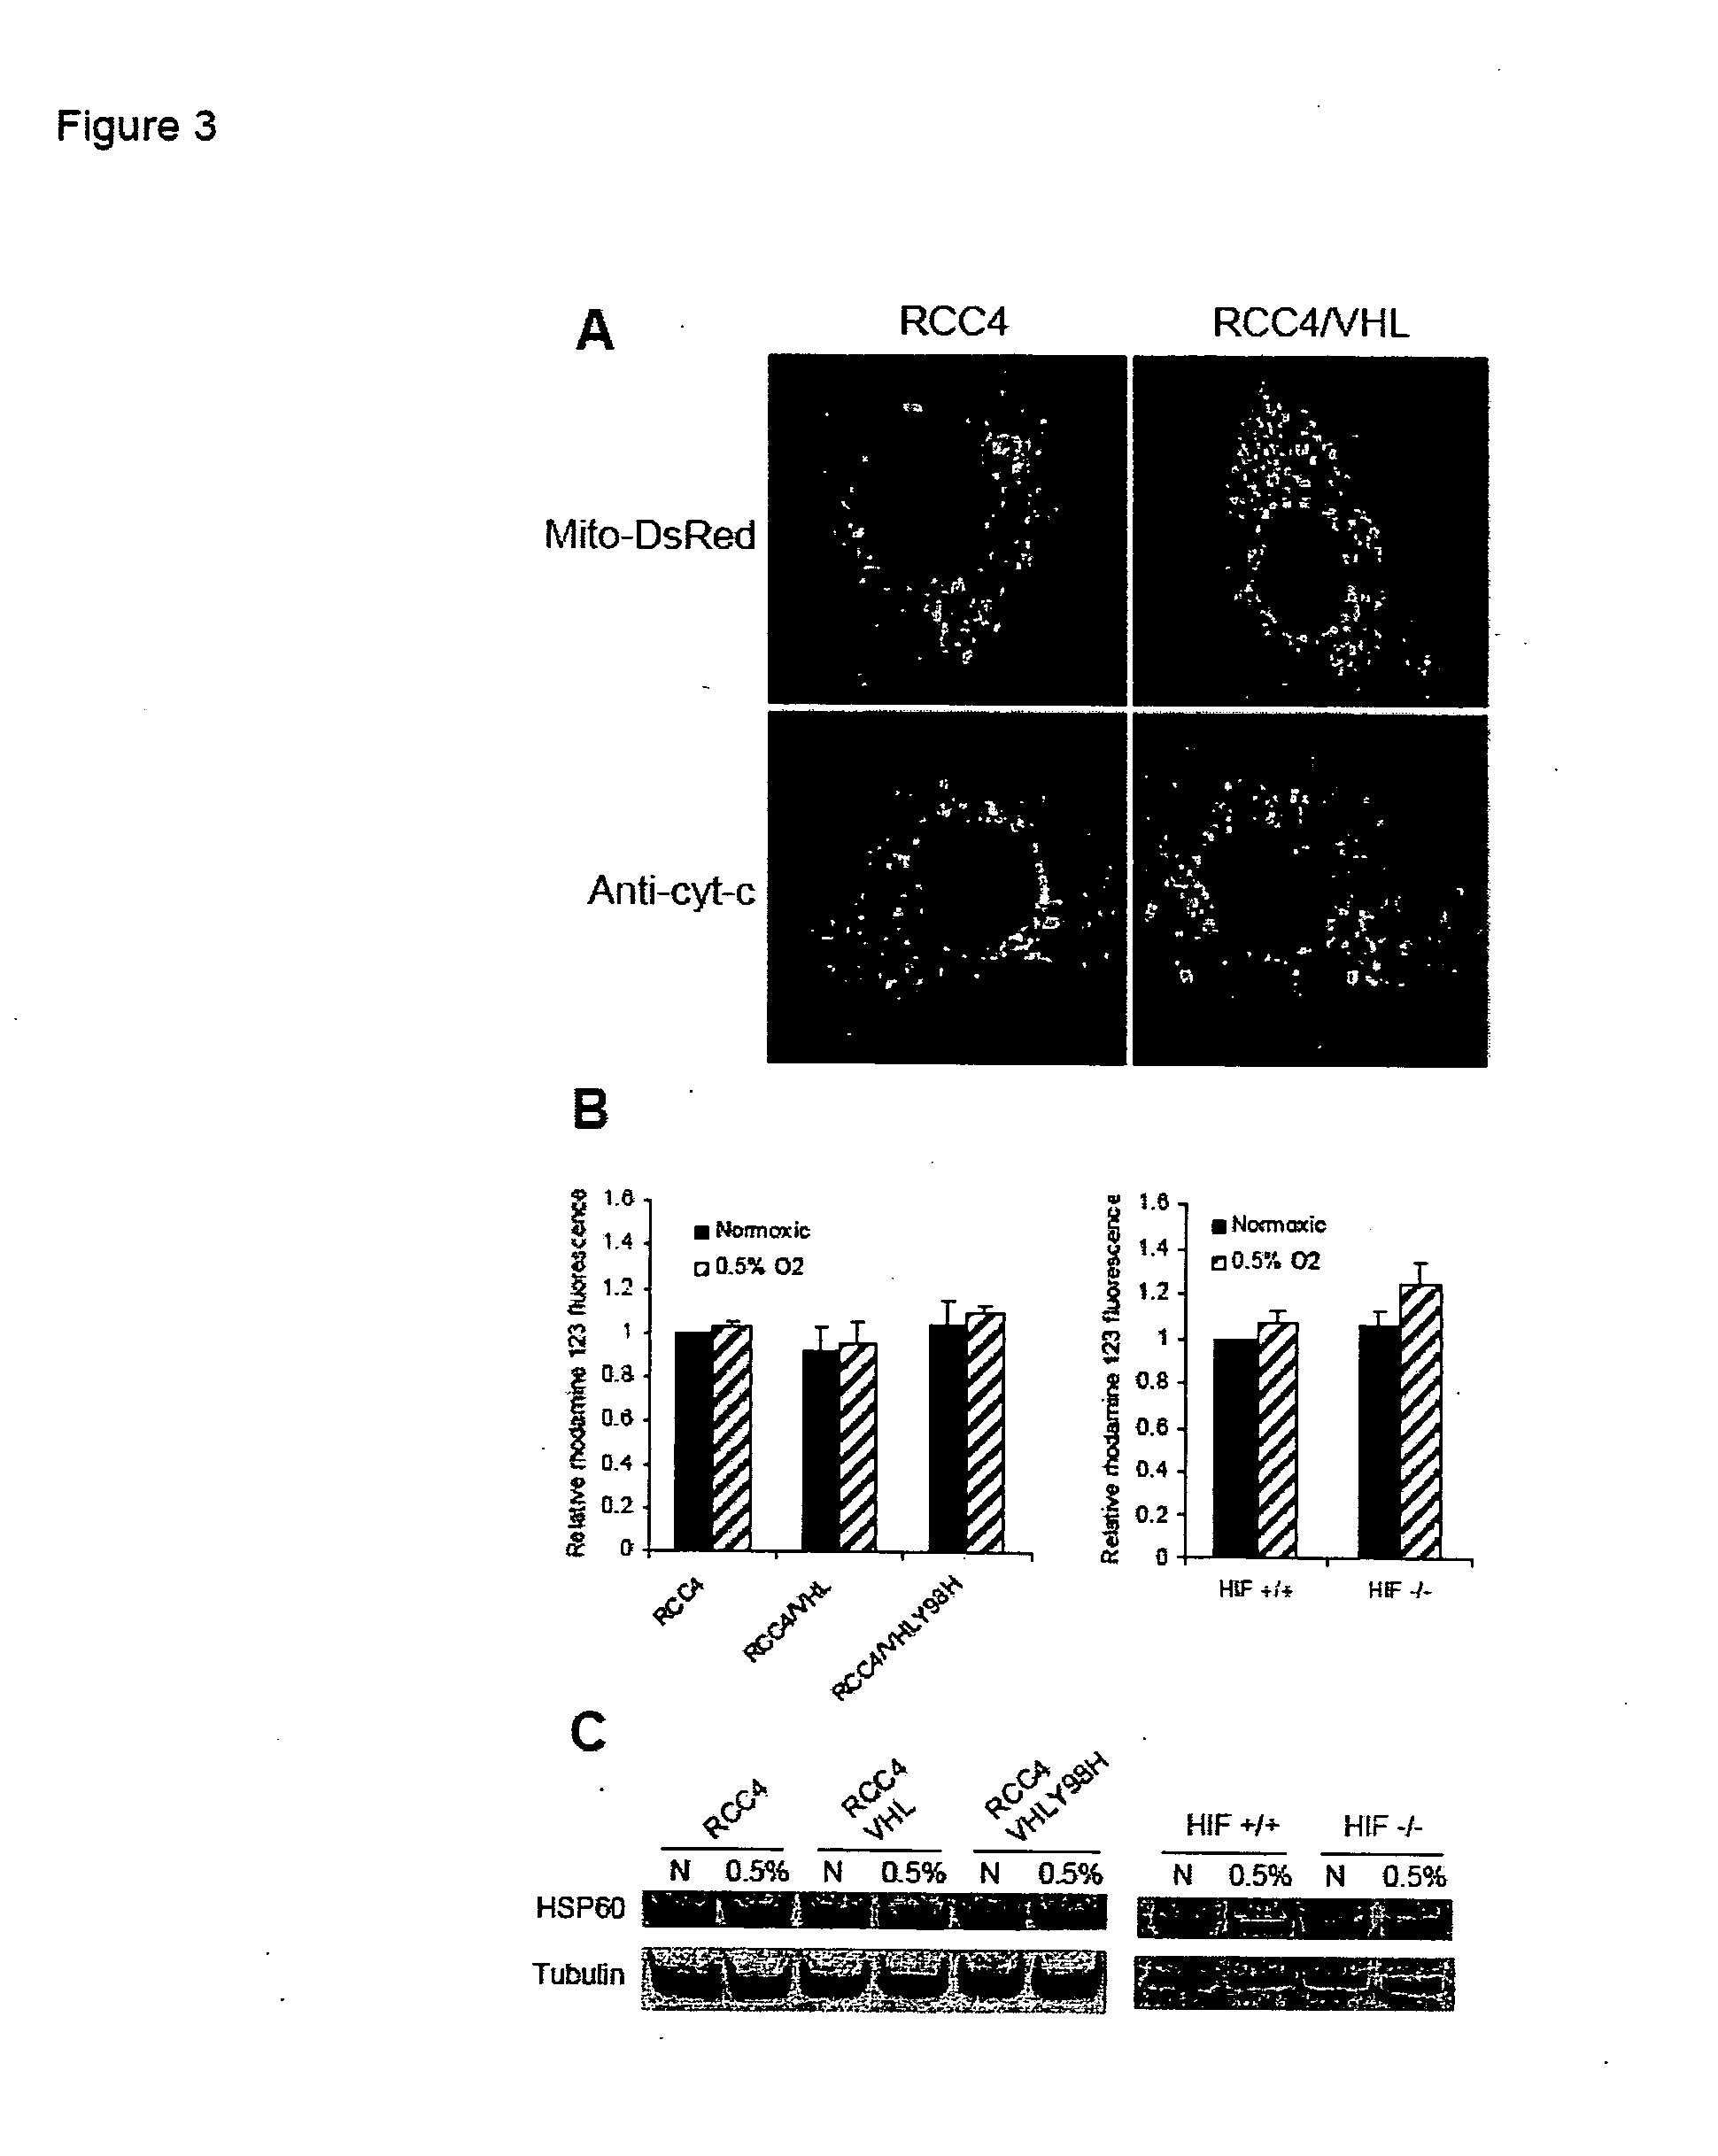 Modulation of mitochondrial oxygen consumption for therapeutic purposes